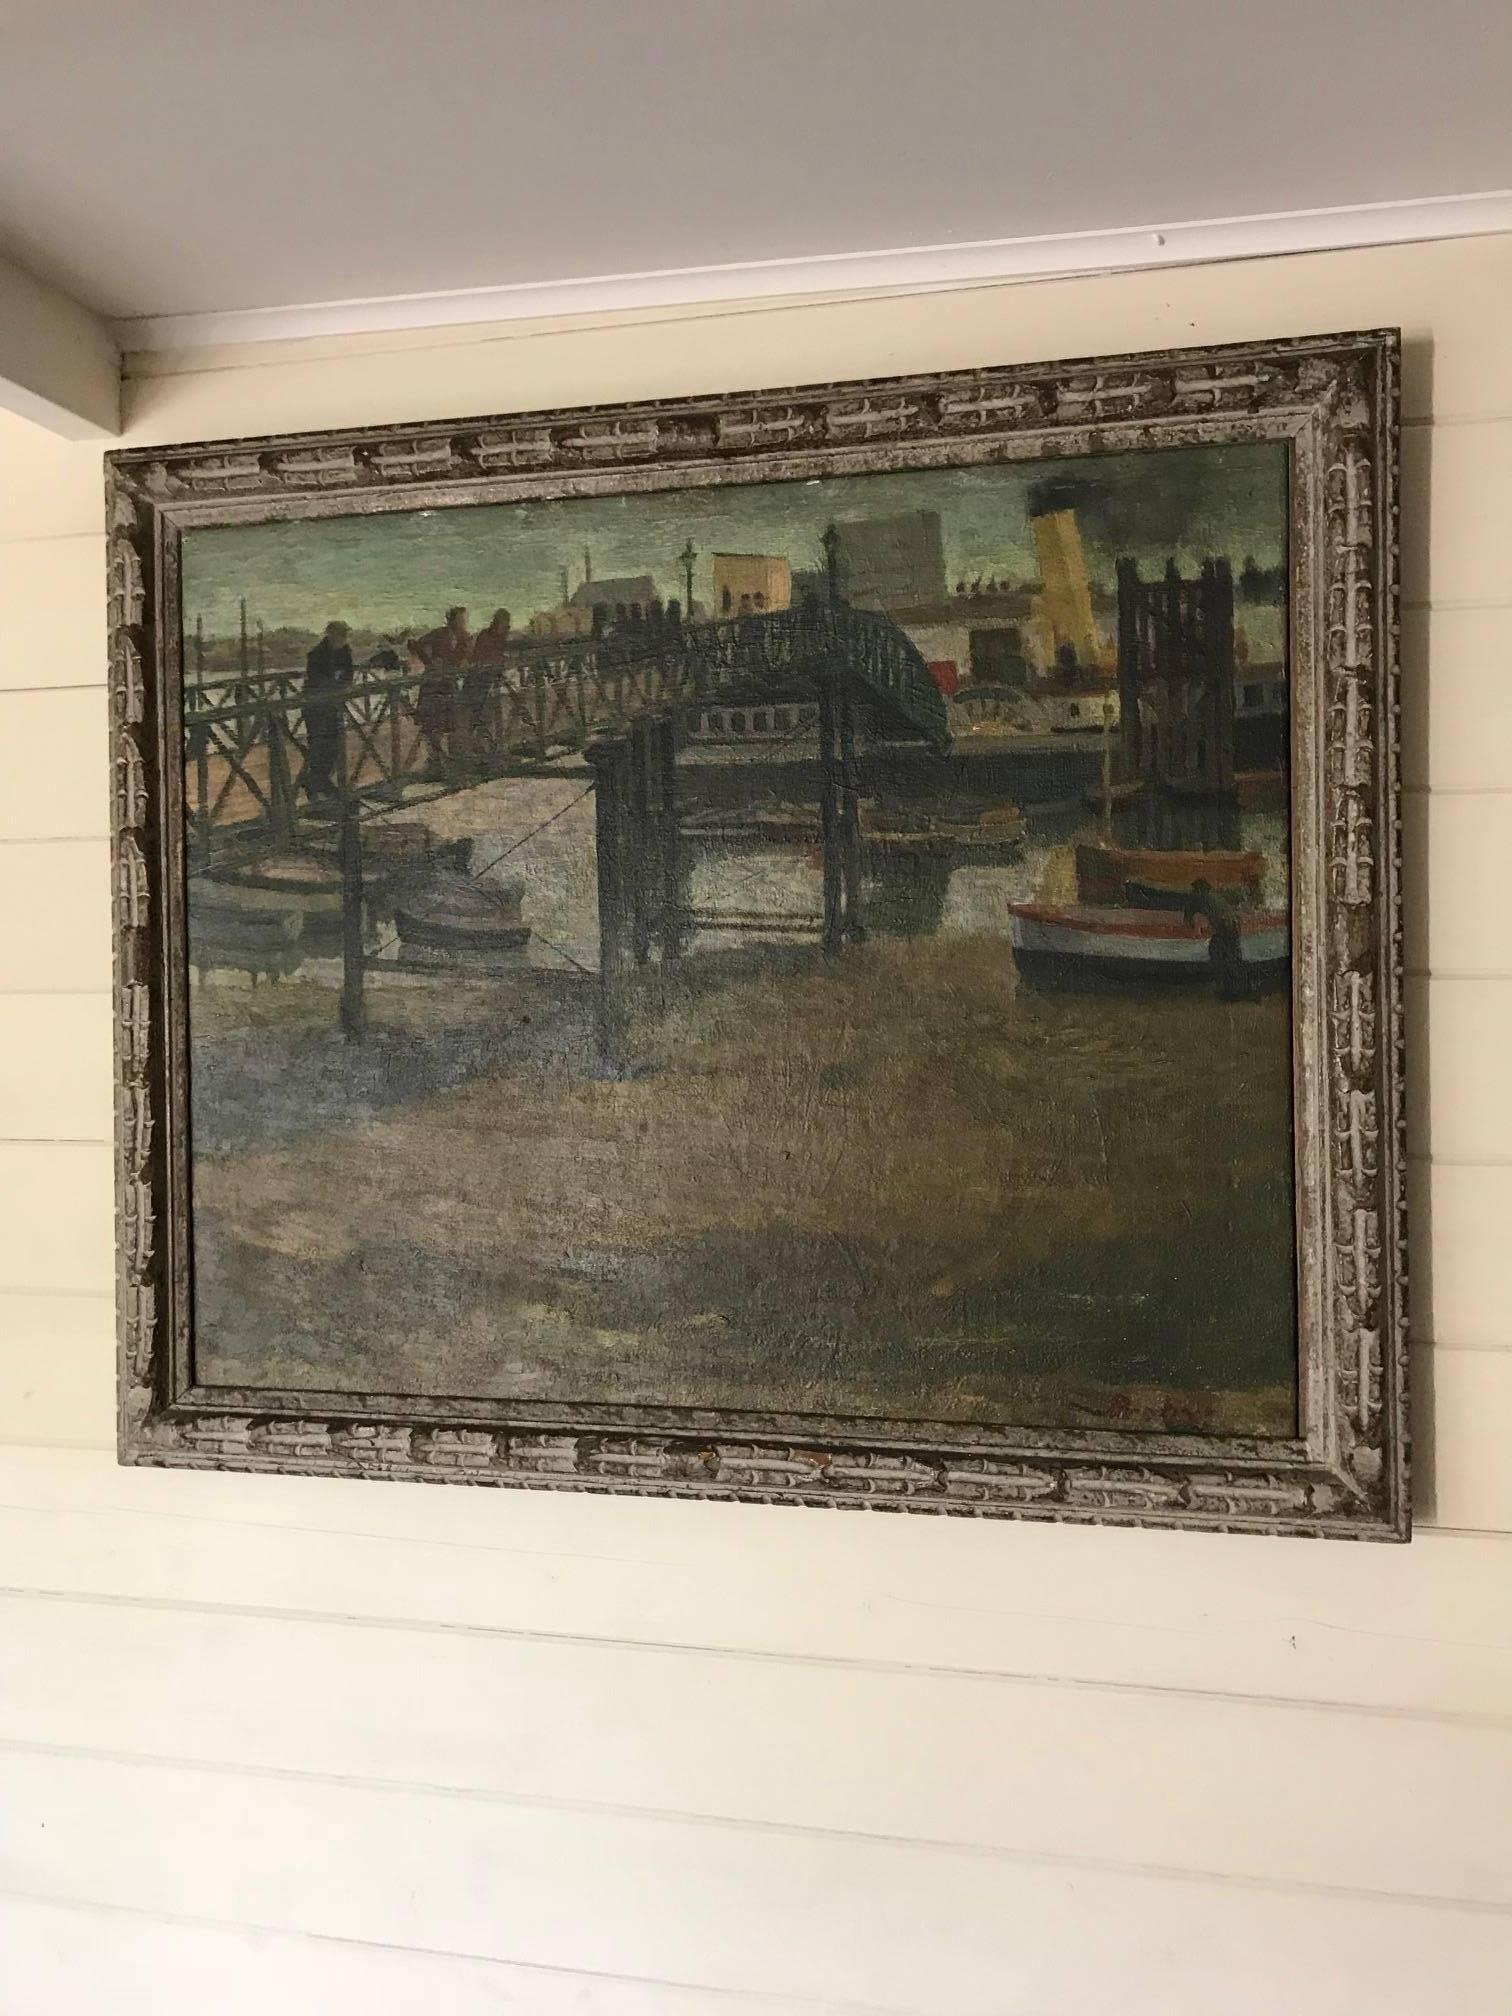 A mid-century oil on re-lined canvas painting of an urban river scene. Signed Probyn. Framed in a carved wood frame.